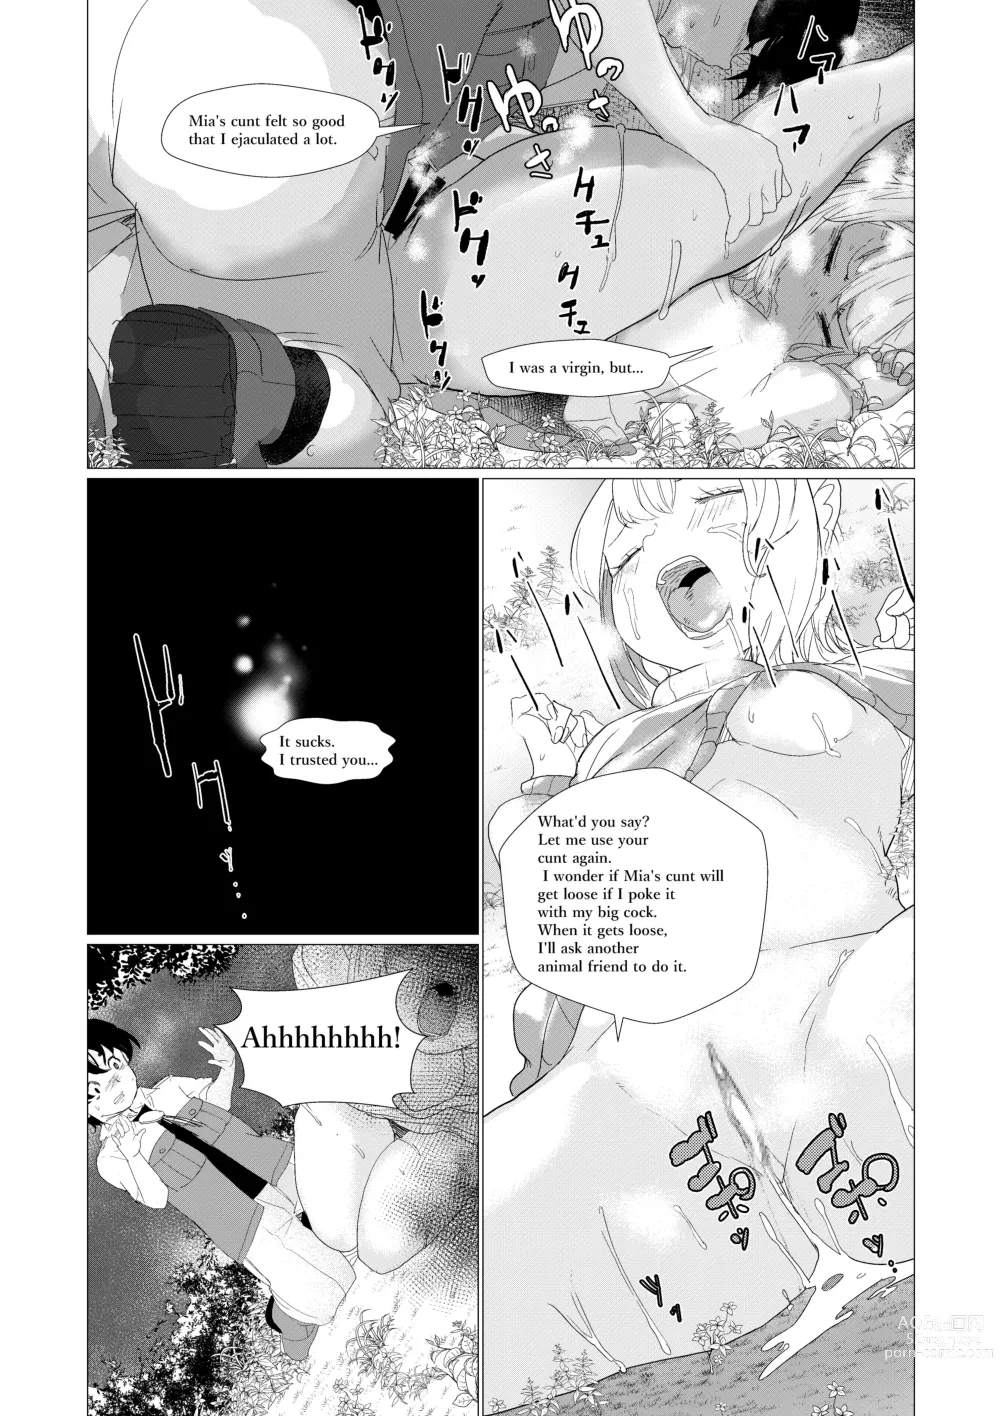 Page 43 of doujinshi Sensei... My Penis is Going Crazy